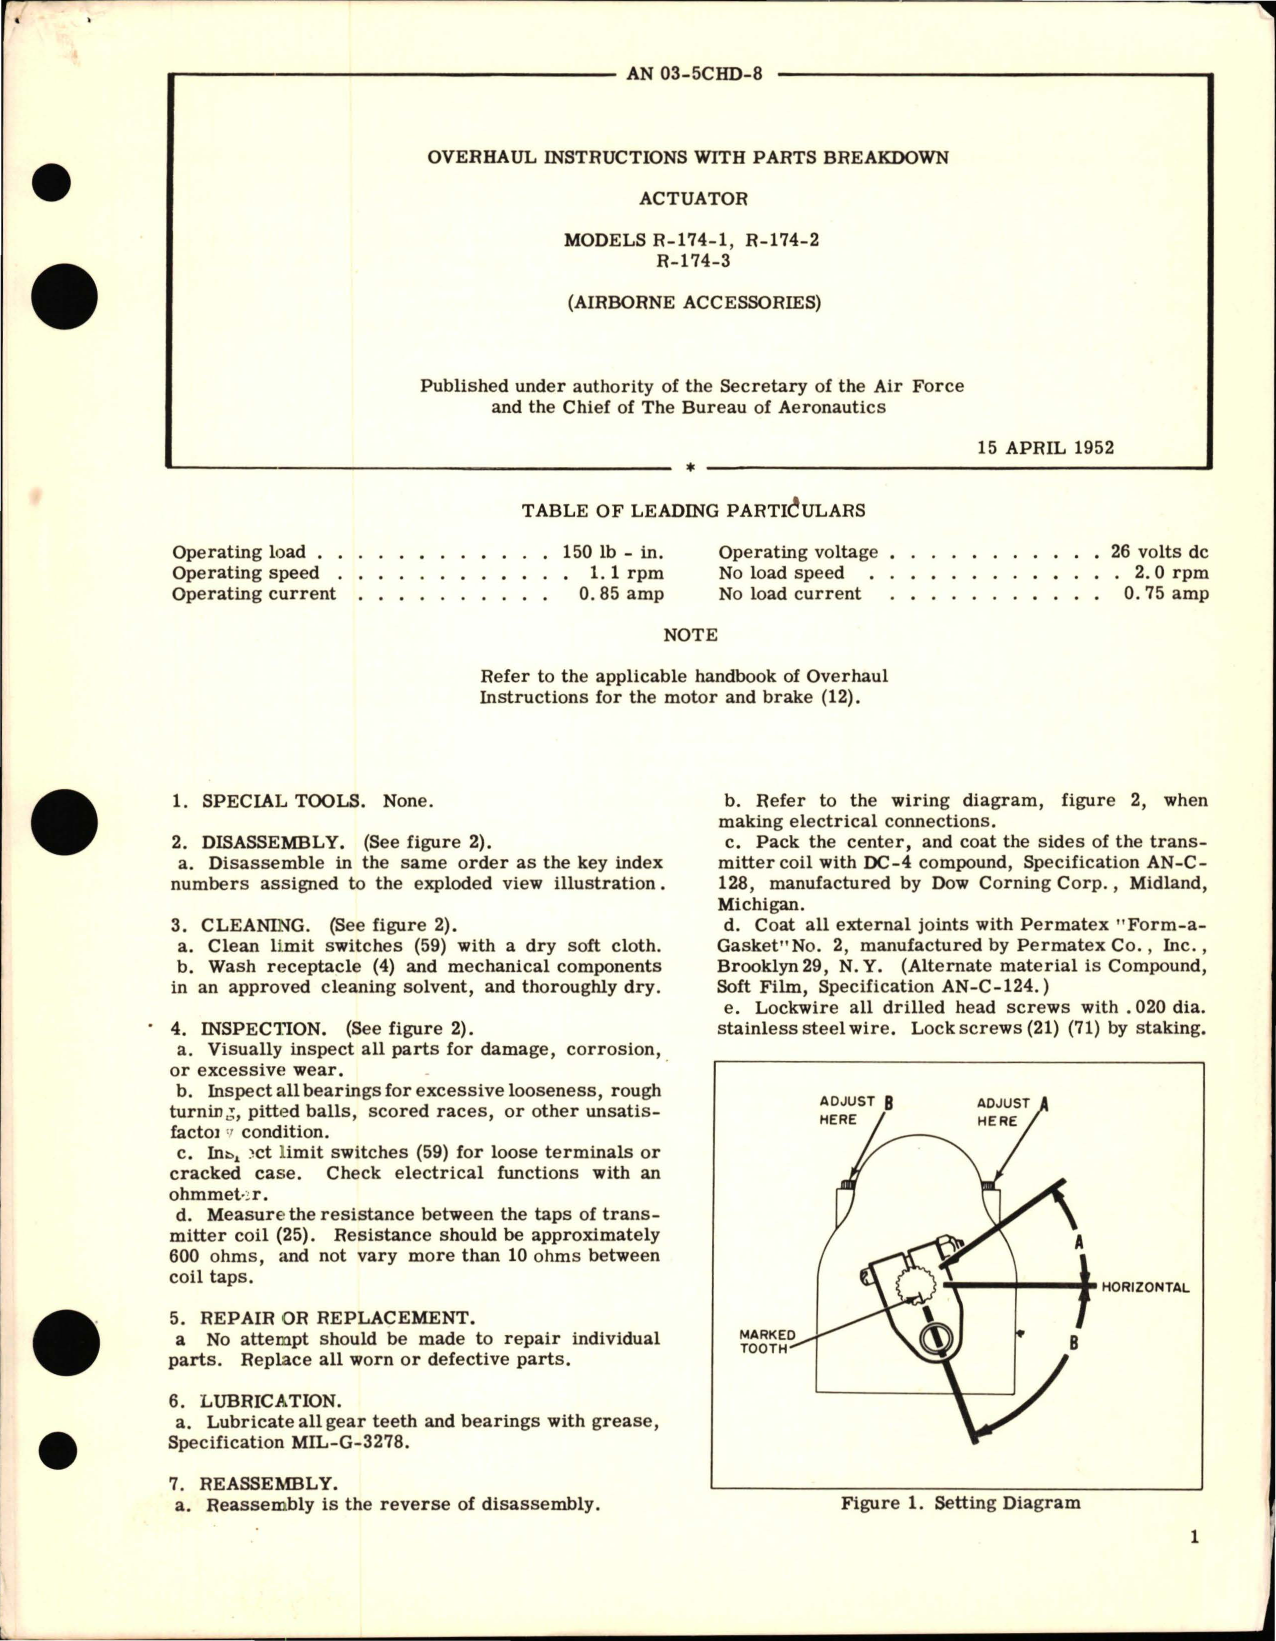 Sample page 1 from AirCorps Library document: Overhaul Instructions with Parts Breakdown for Actuator - Models R-174-1, R-174-2 and R-174-3 